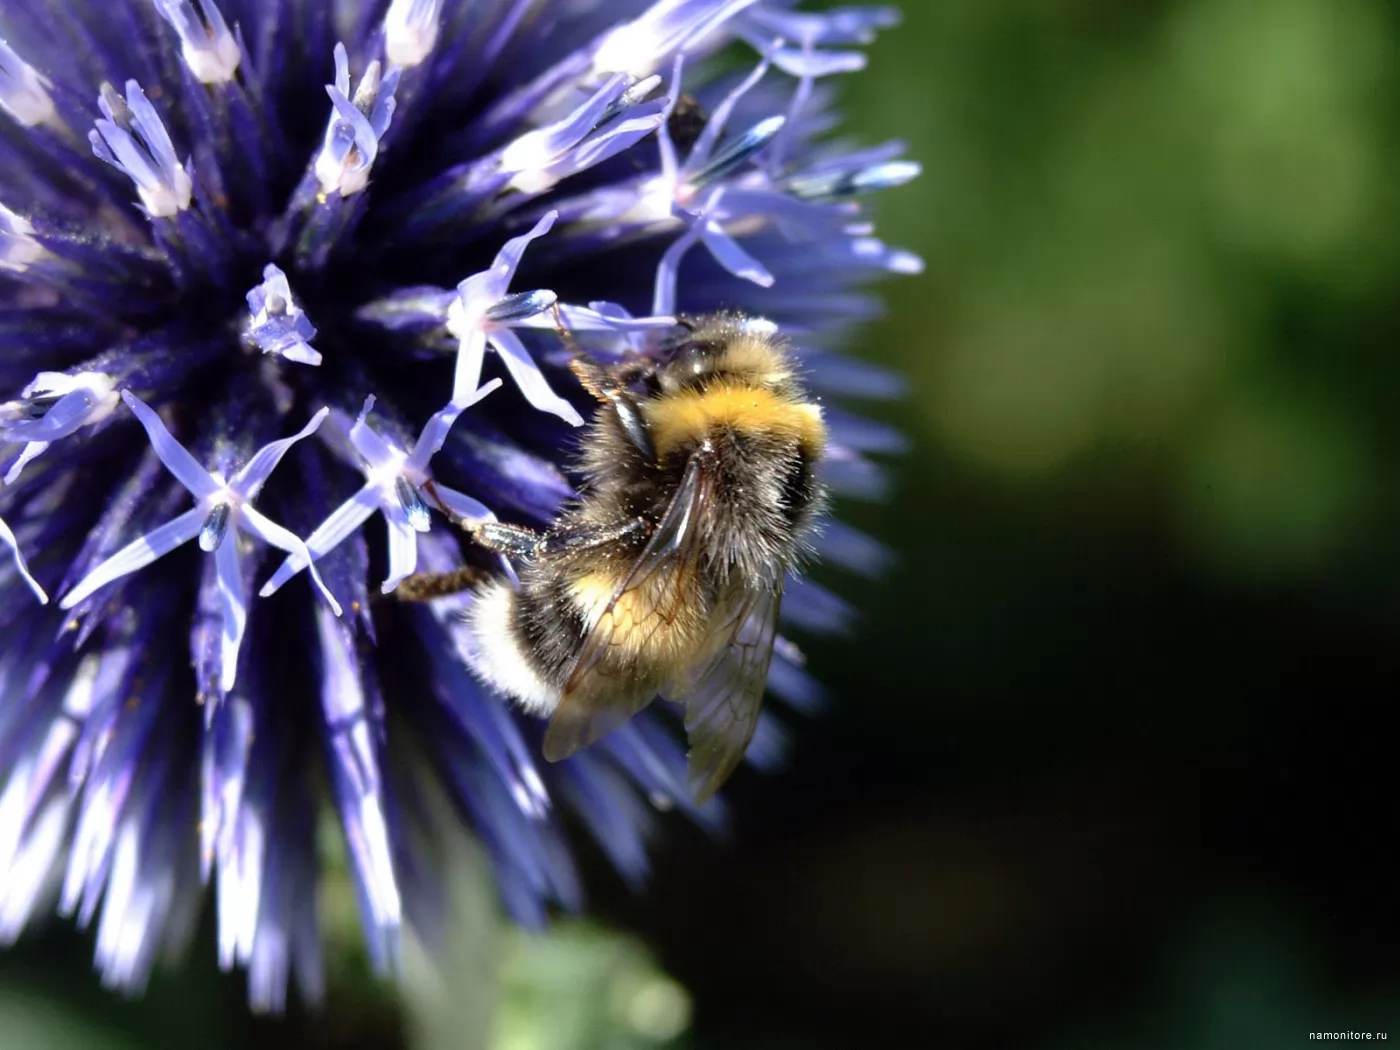 Fluffy bumblebee, flowers, insects, lilac x